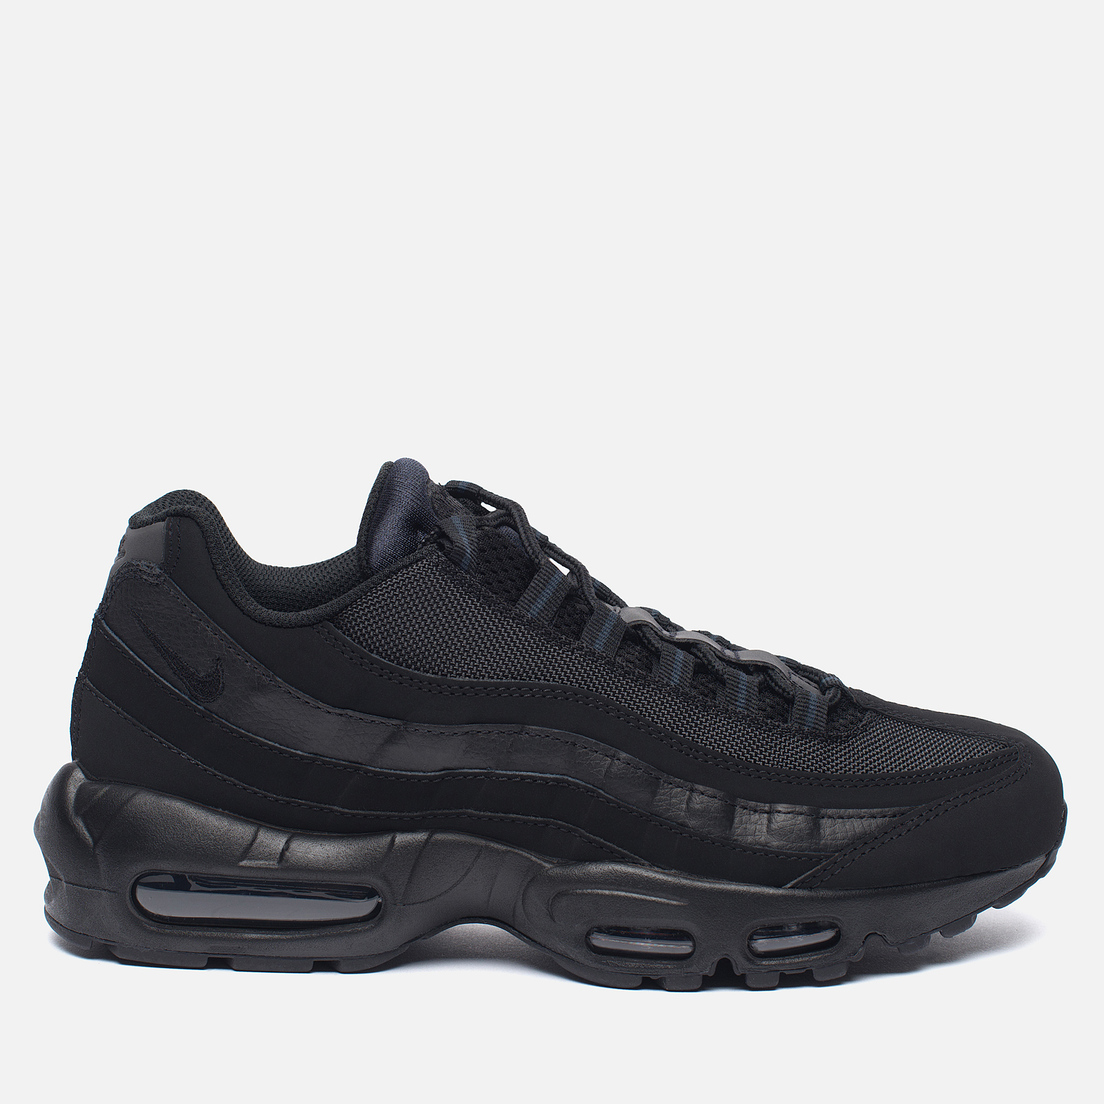 air max 95s black and white